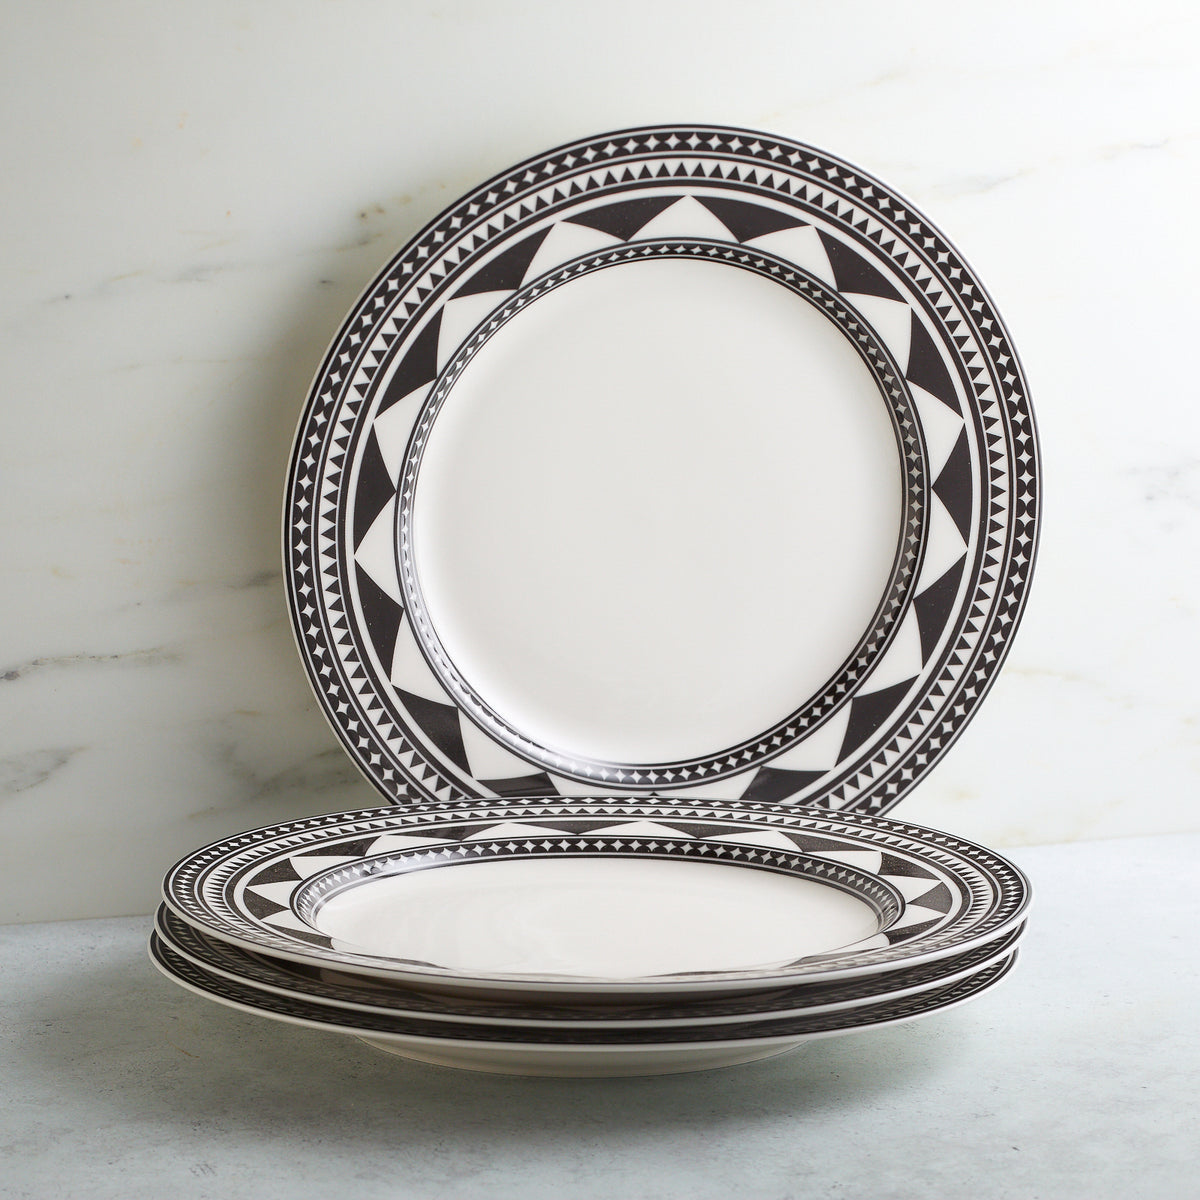 A stack of five Caskata Artisanal Home Fez Rimmed Dinner Plates with black graphic prints on the rims, placed on a light gray surface against a white marble background, showcases sophisticated dinnerware with subtle Moroccan patterns.